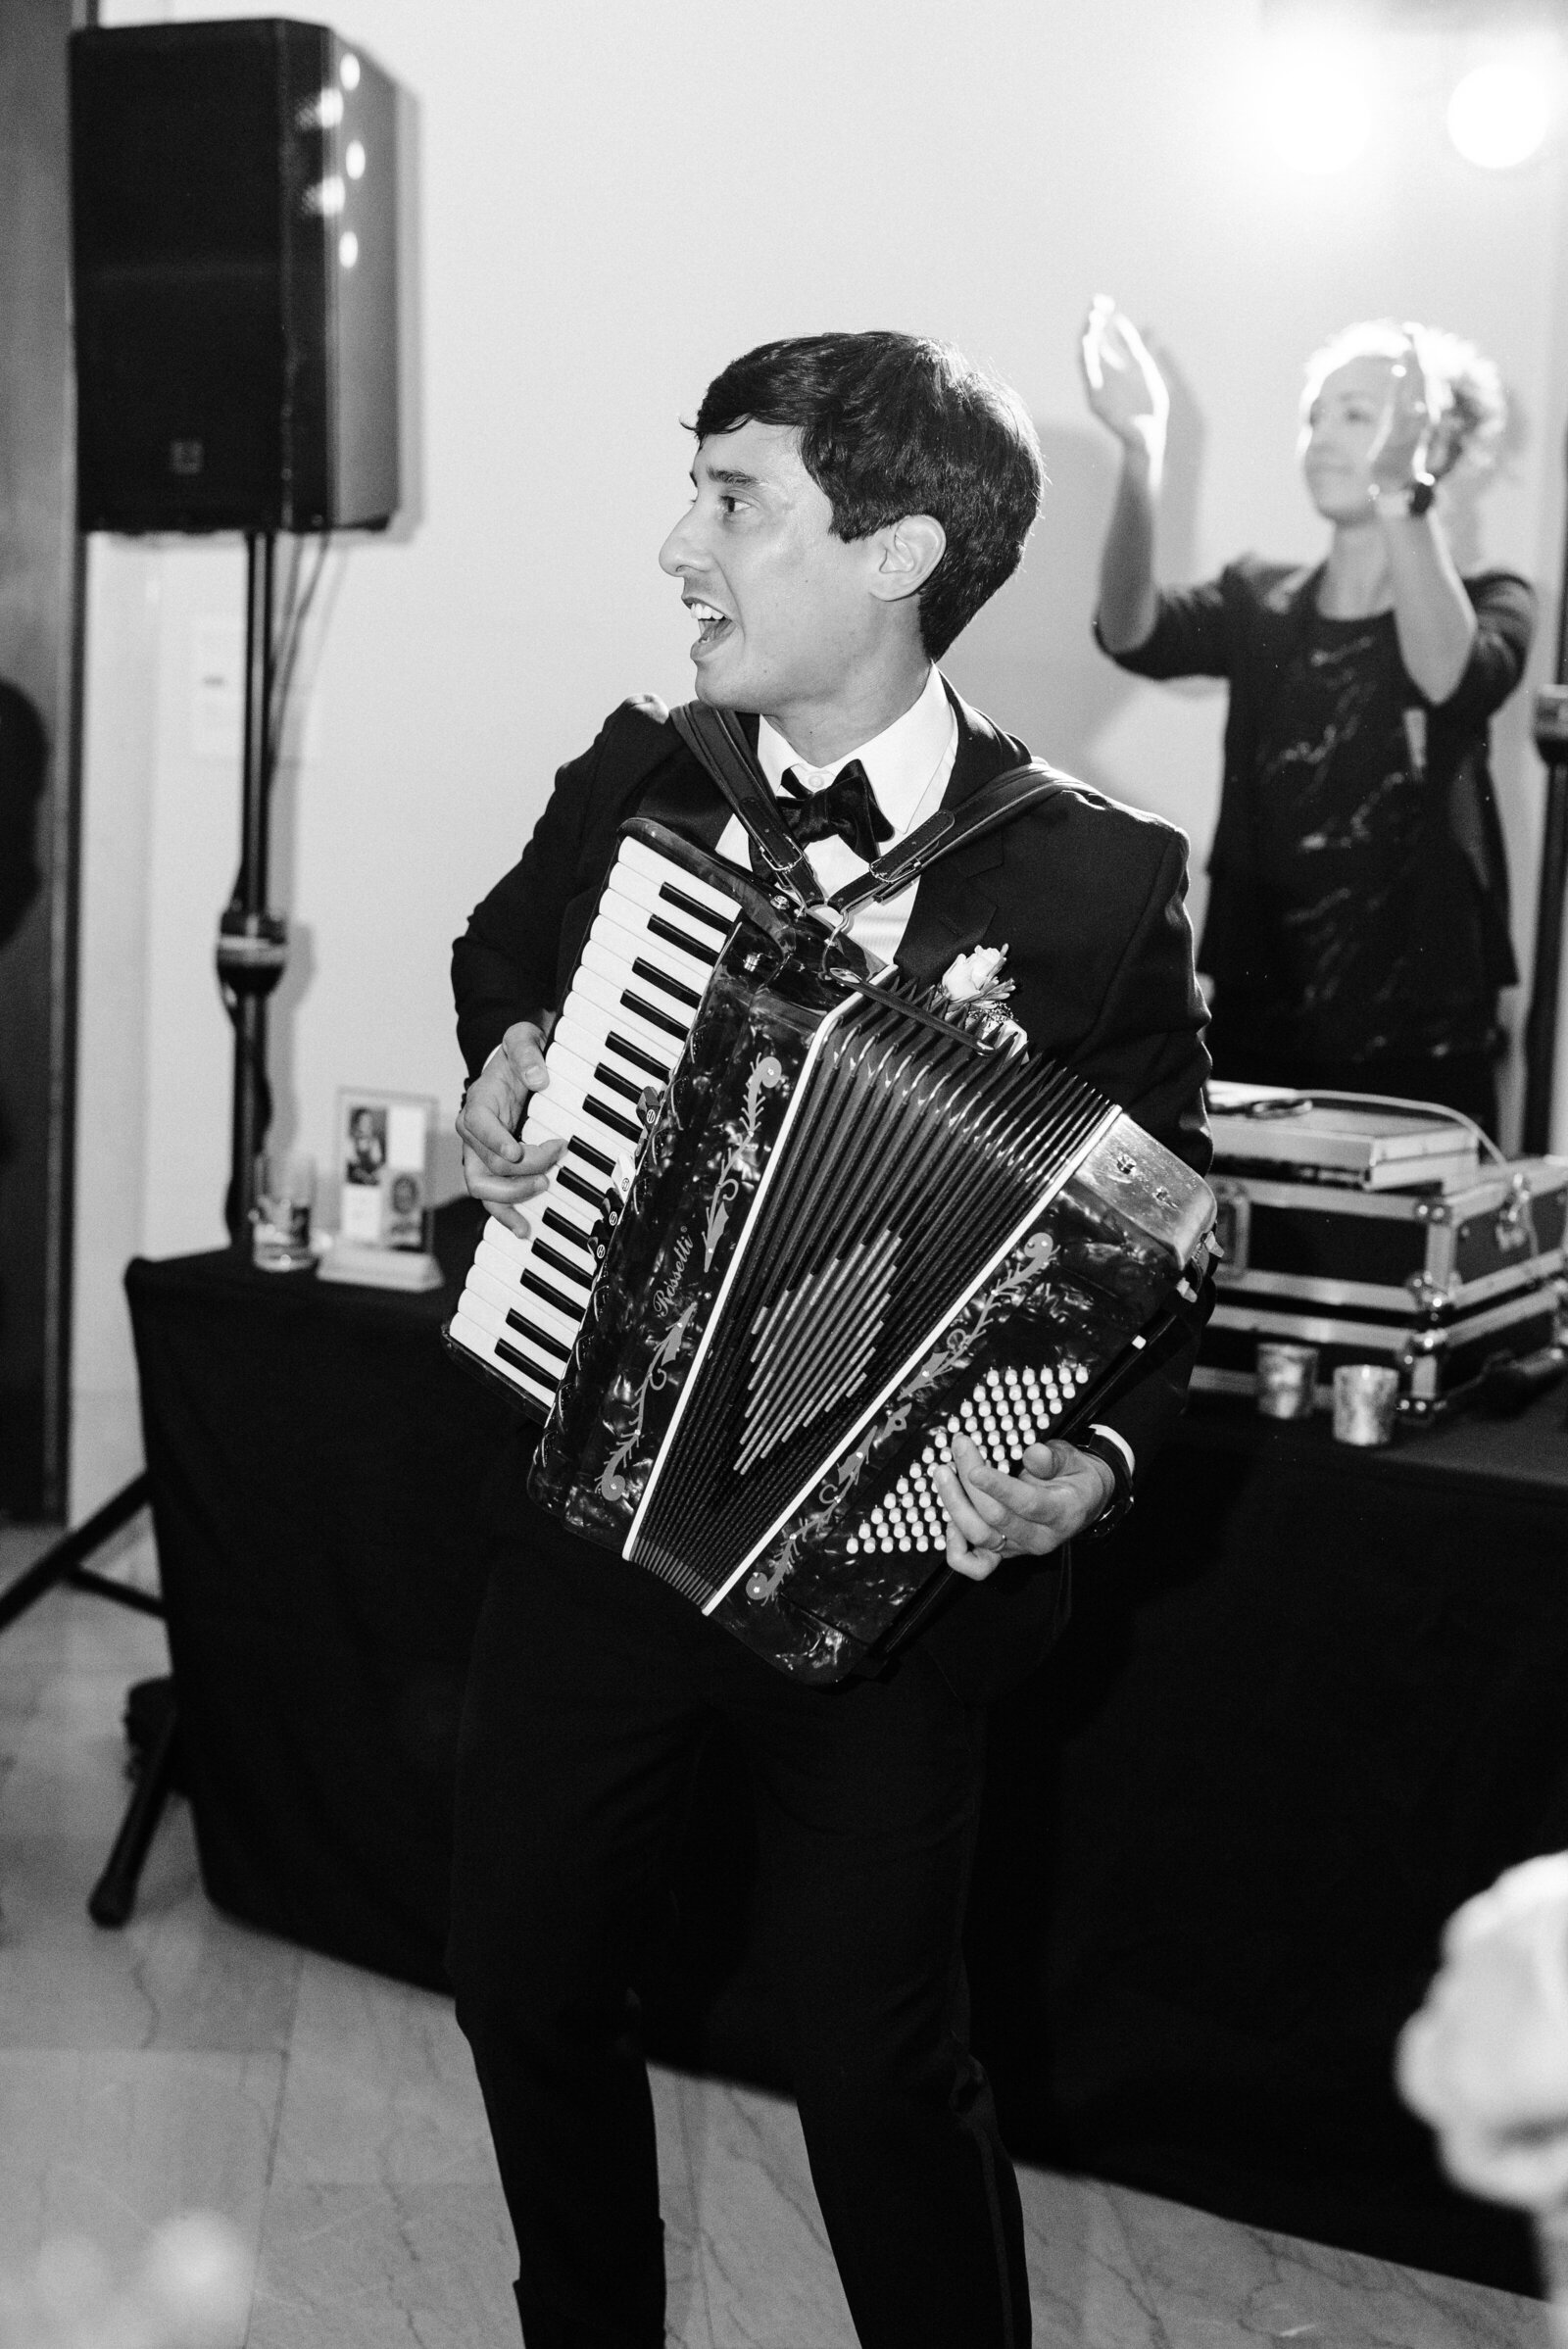 The groom is playing the accordion at the Minneapolis Institute of Art